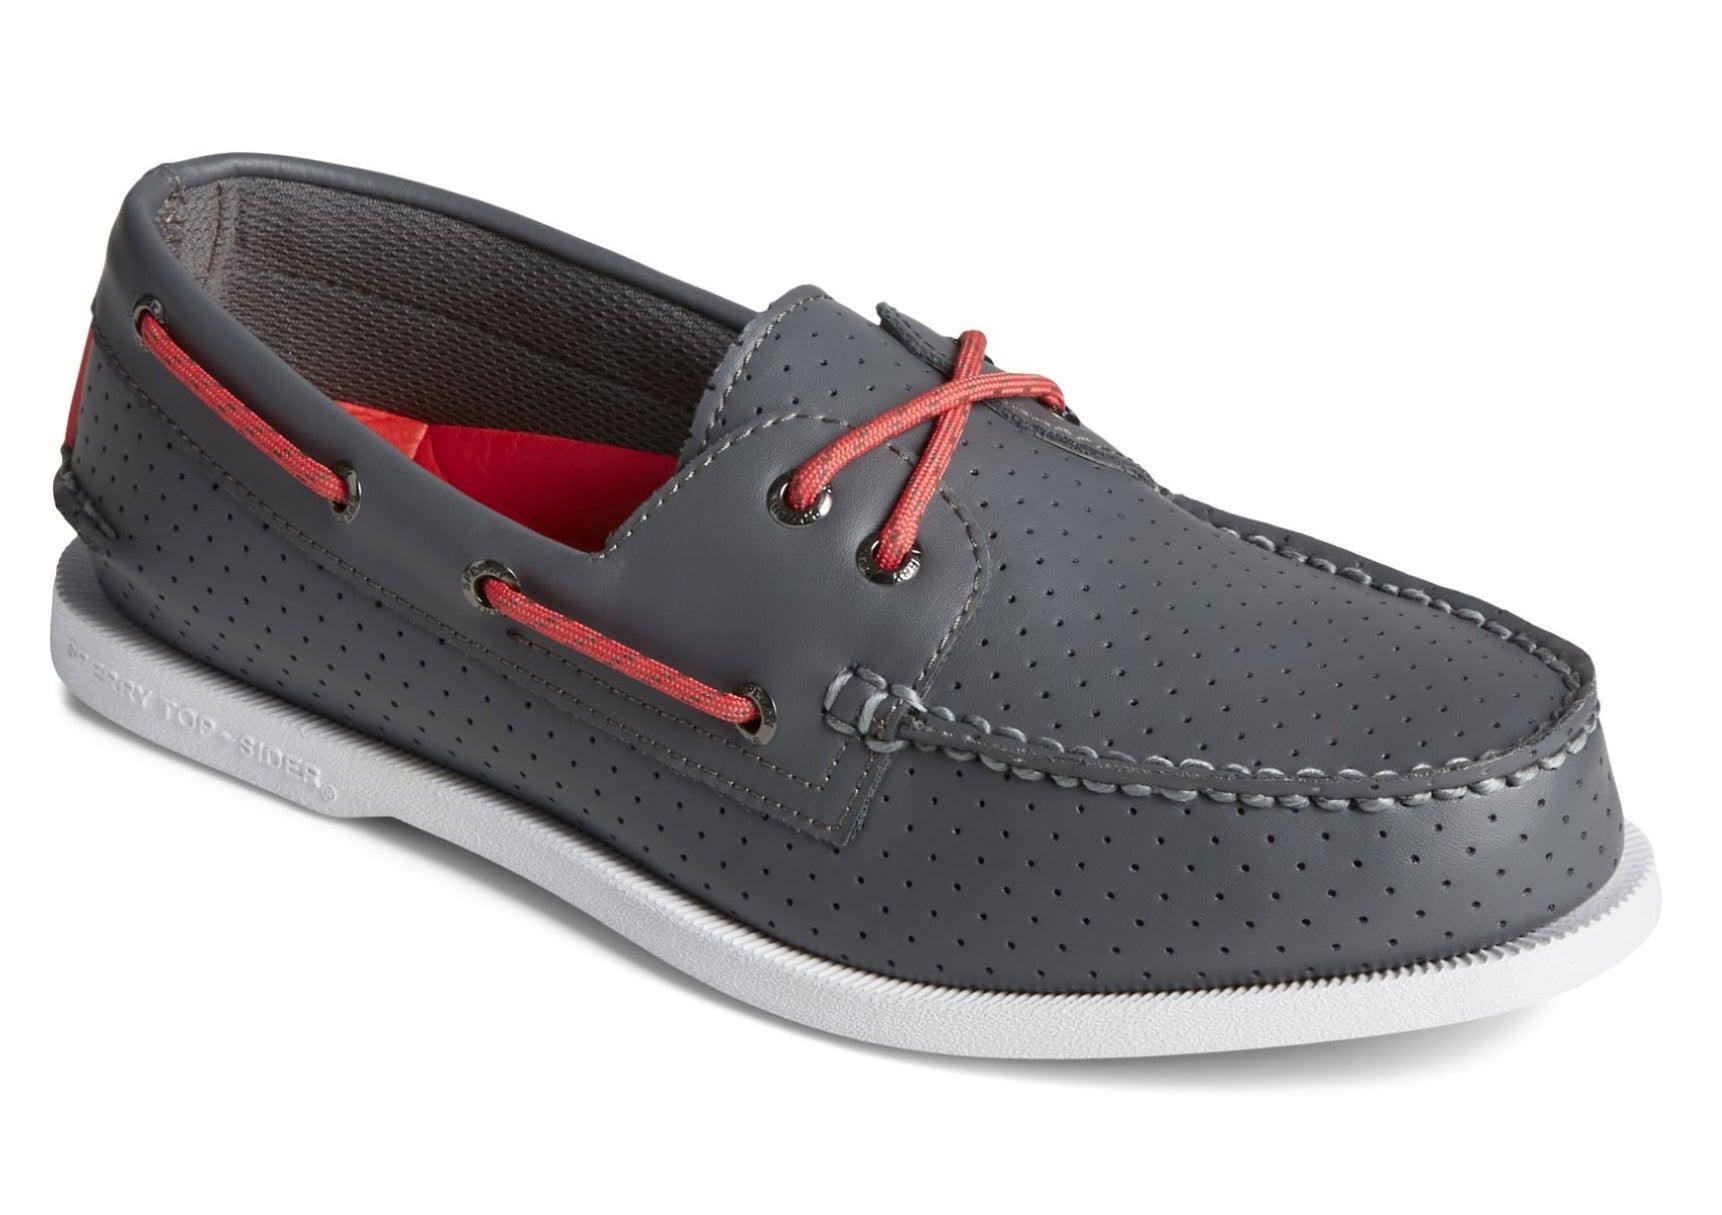 Men’s A/O Resort Perf - The Shoe CollectiveSperry